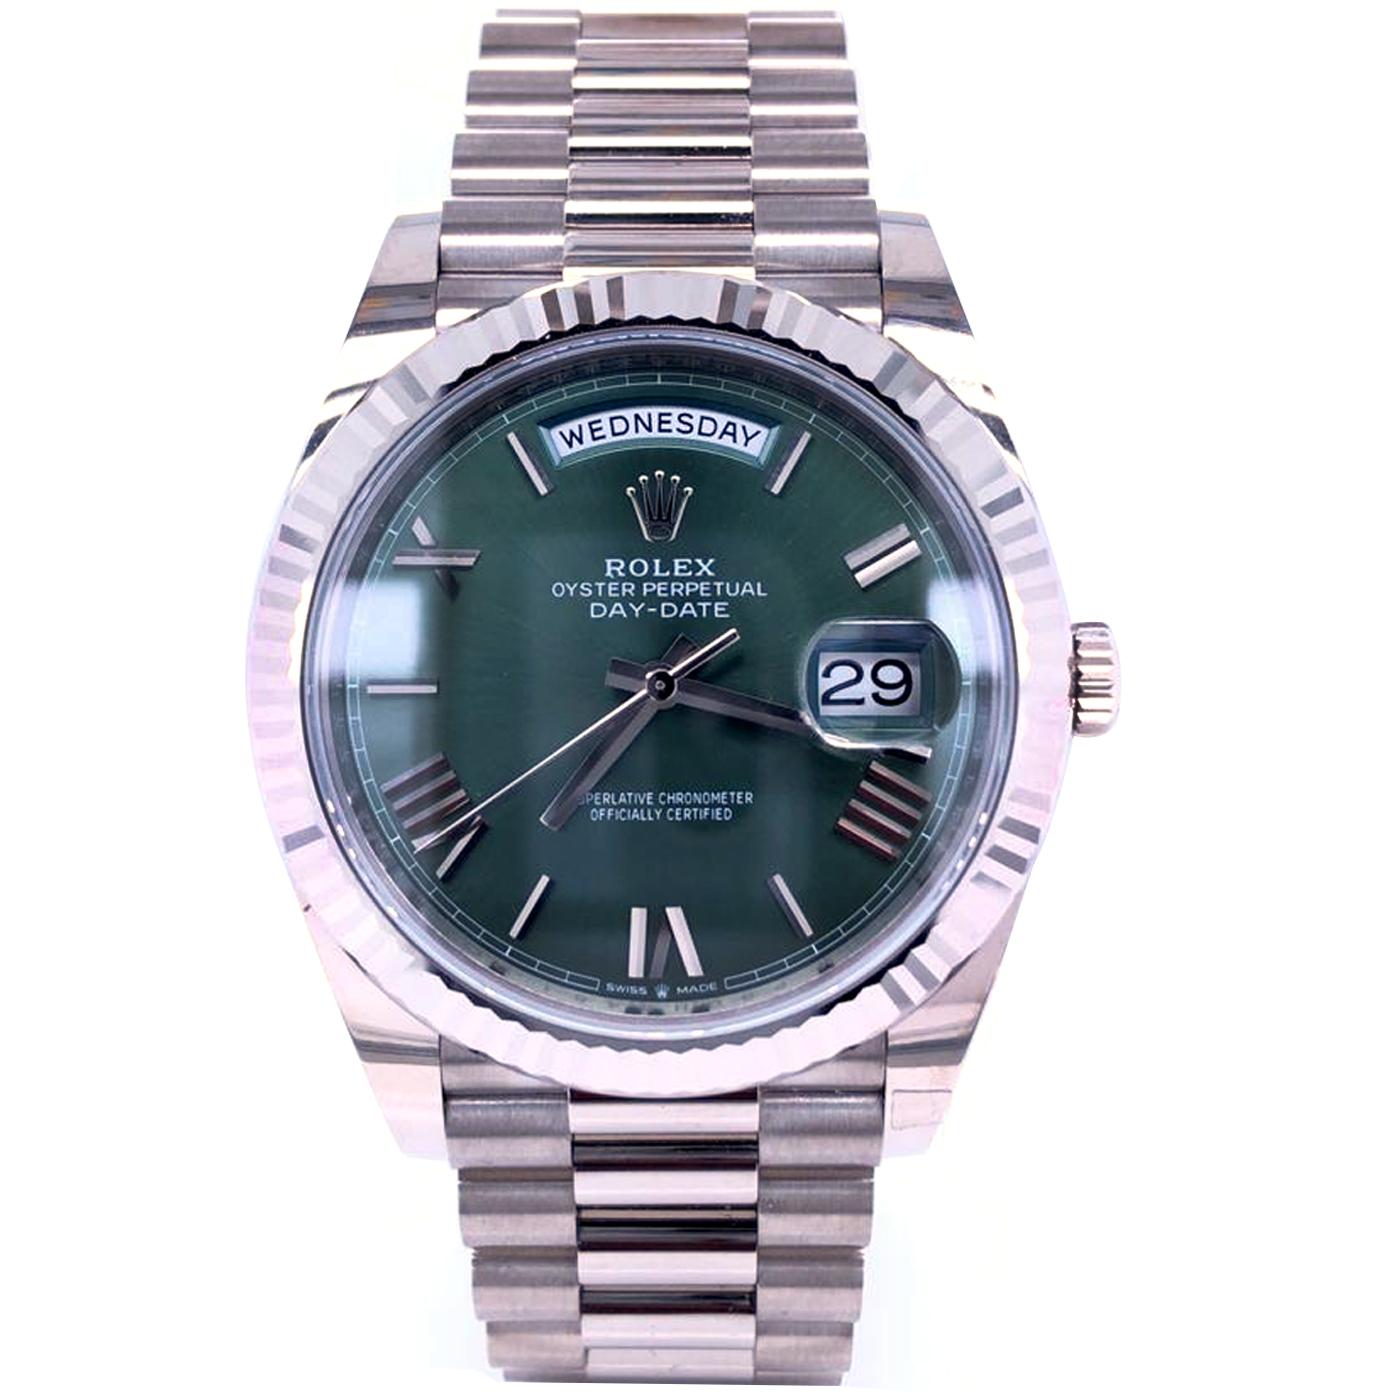 The Oyster Perpetual Day-Date 40 in 18 ct white gold with an olive green dial, fluted bezel, and a President bracelet. The Day-Date was the first watch to indicate the day of the week spelled out in full when it was first presented in 1956. The